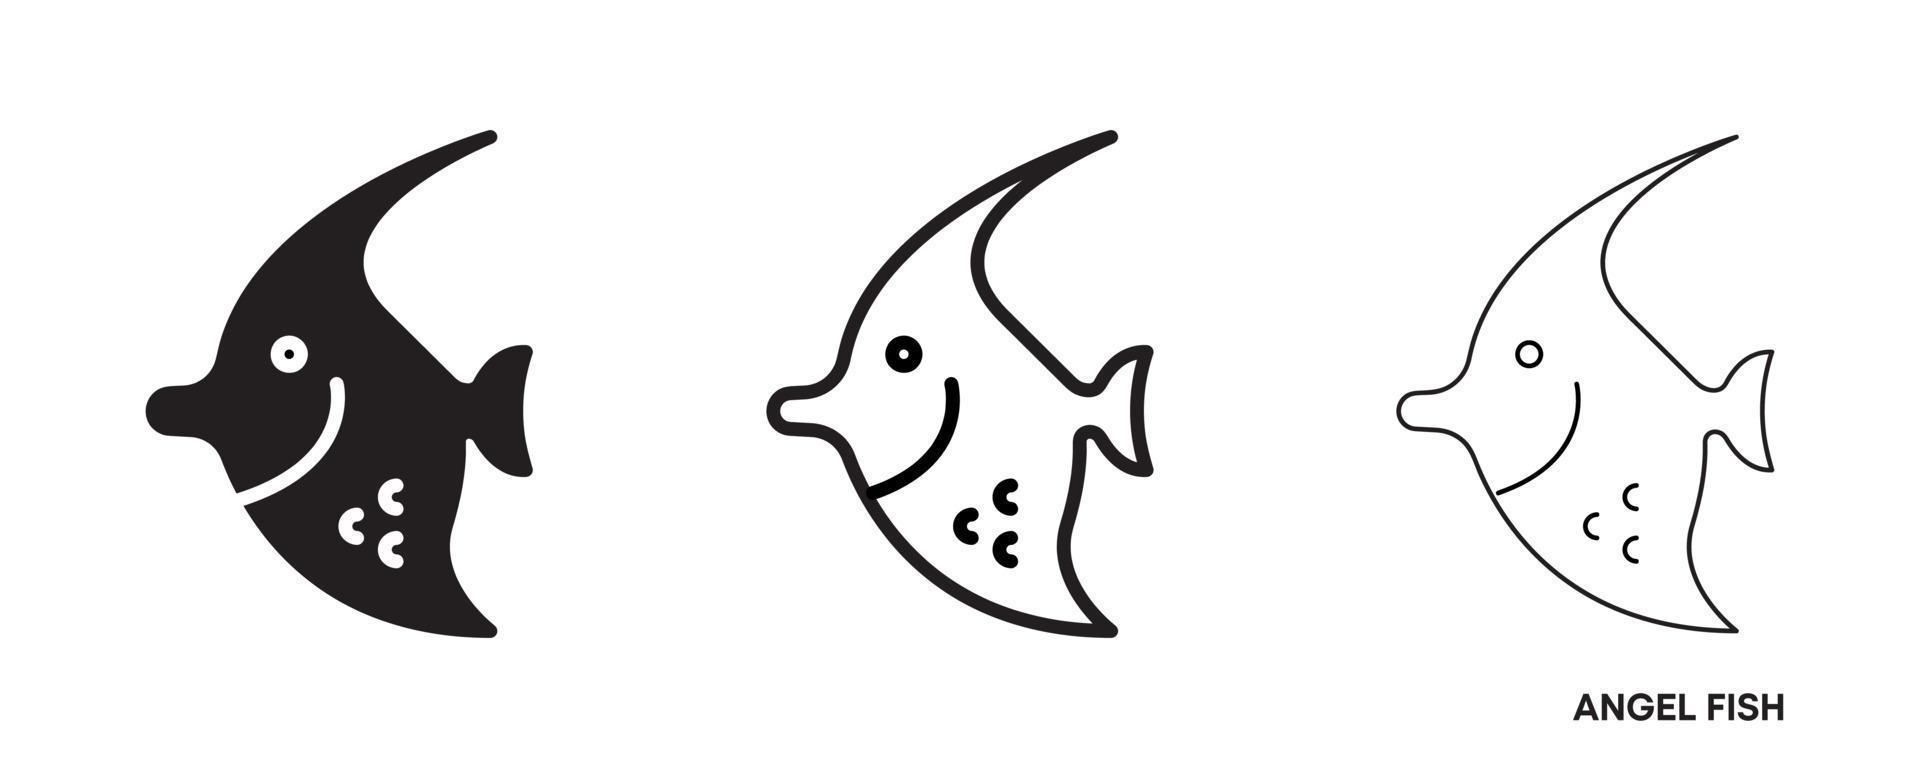 Angel fish line icon set. Such icons include thin, thick and silhouette Angel fish icon set. Editable line. Fish icon. Fish logo template. Creative vector symbol of fishing club or online web shop.